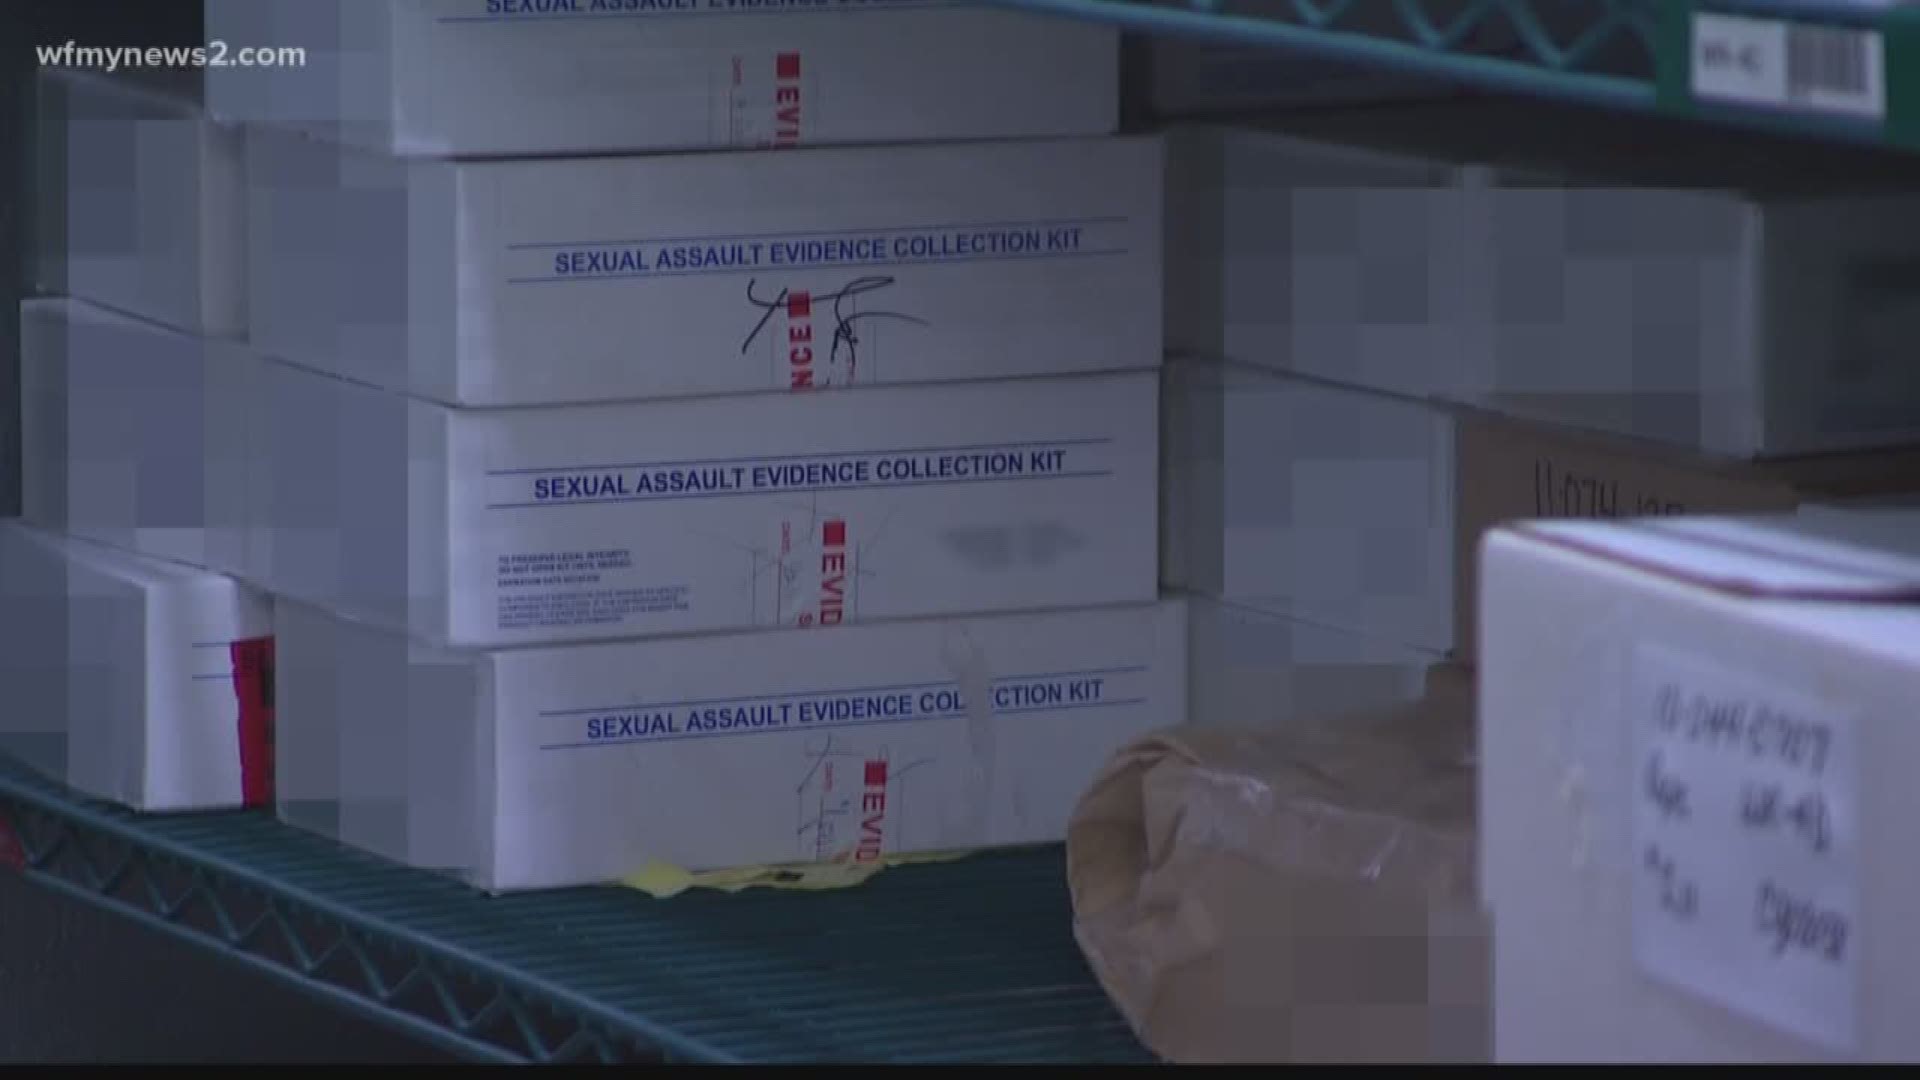 You ask – we verify. Each week we verify questions you have. Today we take a look at the backlog on rape kits.